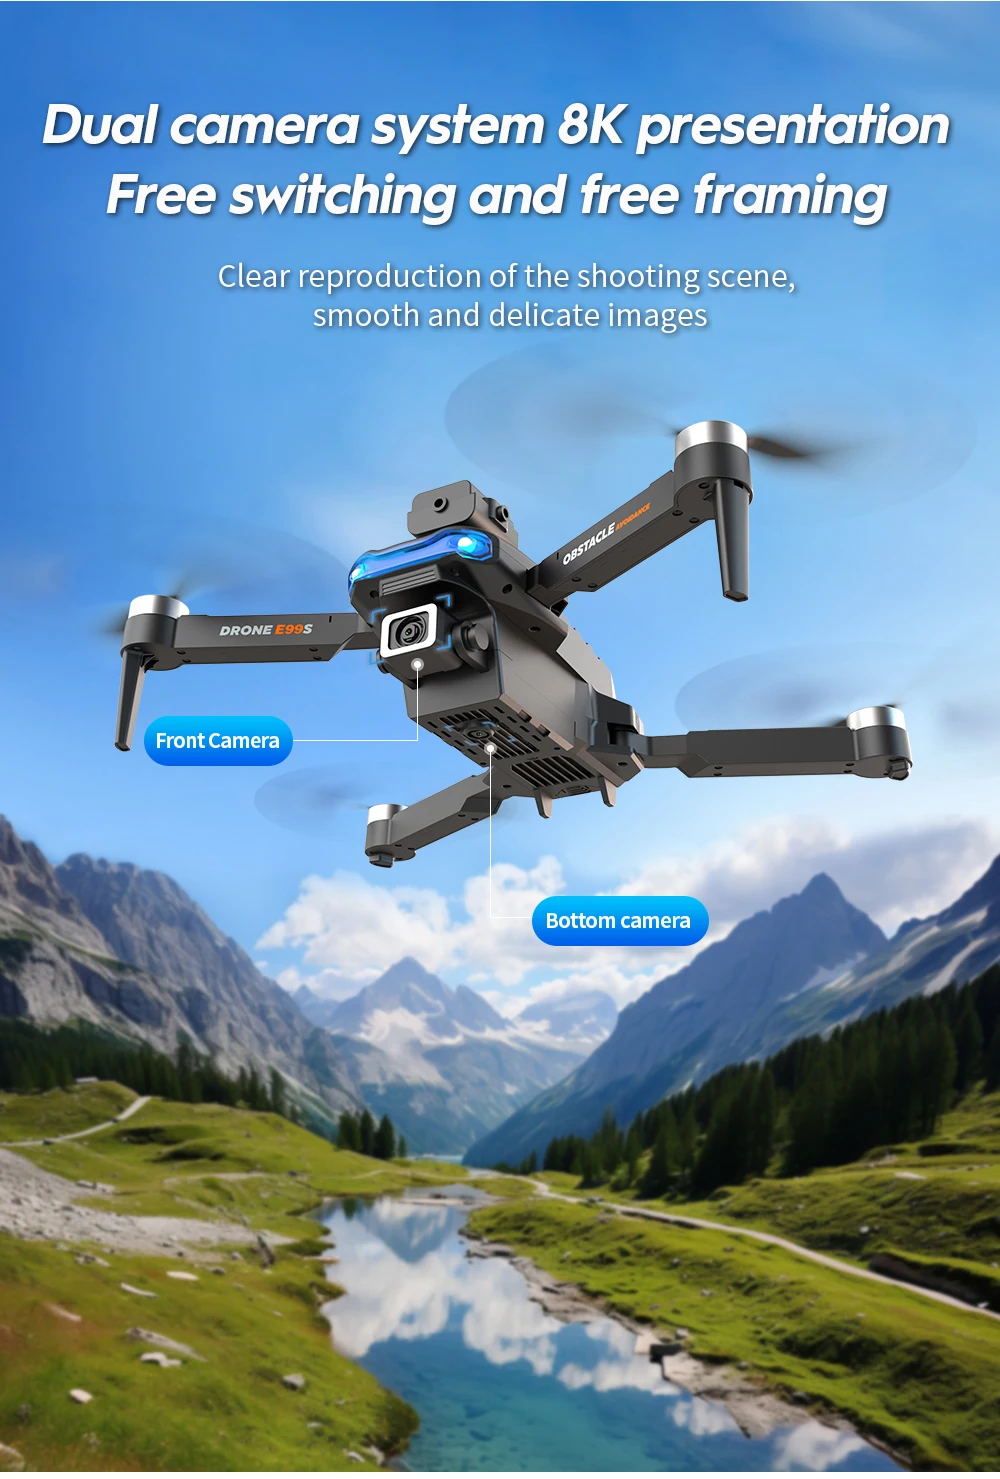 S5916230831c64a51ae4c9797f3495addh E99S Brushless Obstacle Avoidance Drone 4K Dual Camera Aerial Photography Quadrotor Optical Flow Positioning RC Aircraft Toys